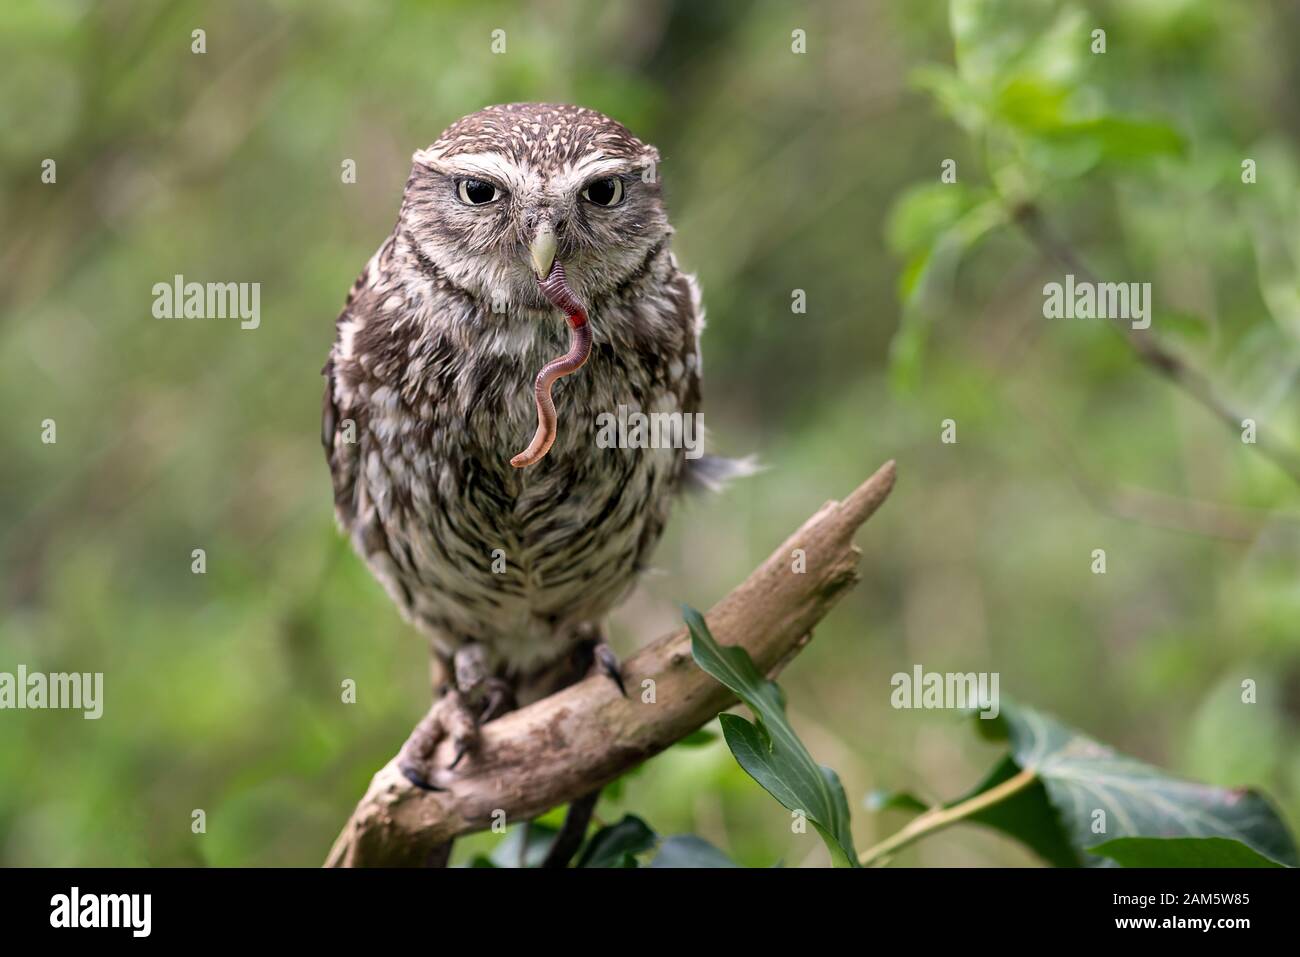 A close up of a little owl, Athene noctua, perched on a branch in a wood and feeding on an earth worm which is hanging from its beak. Stock Photo